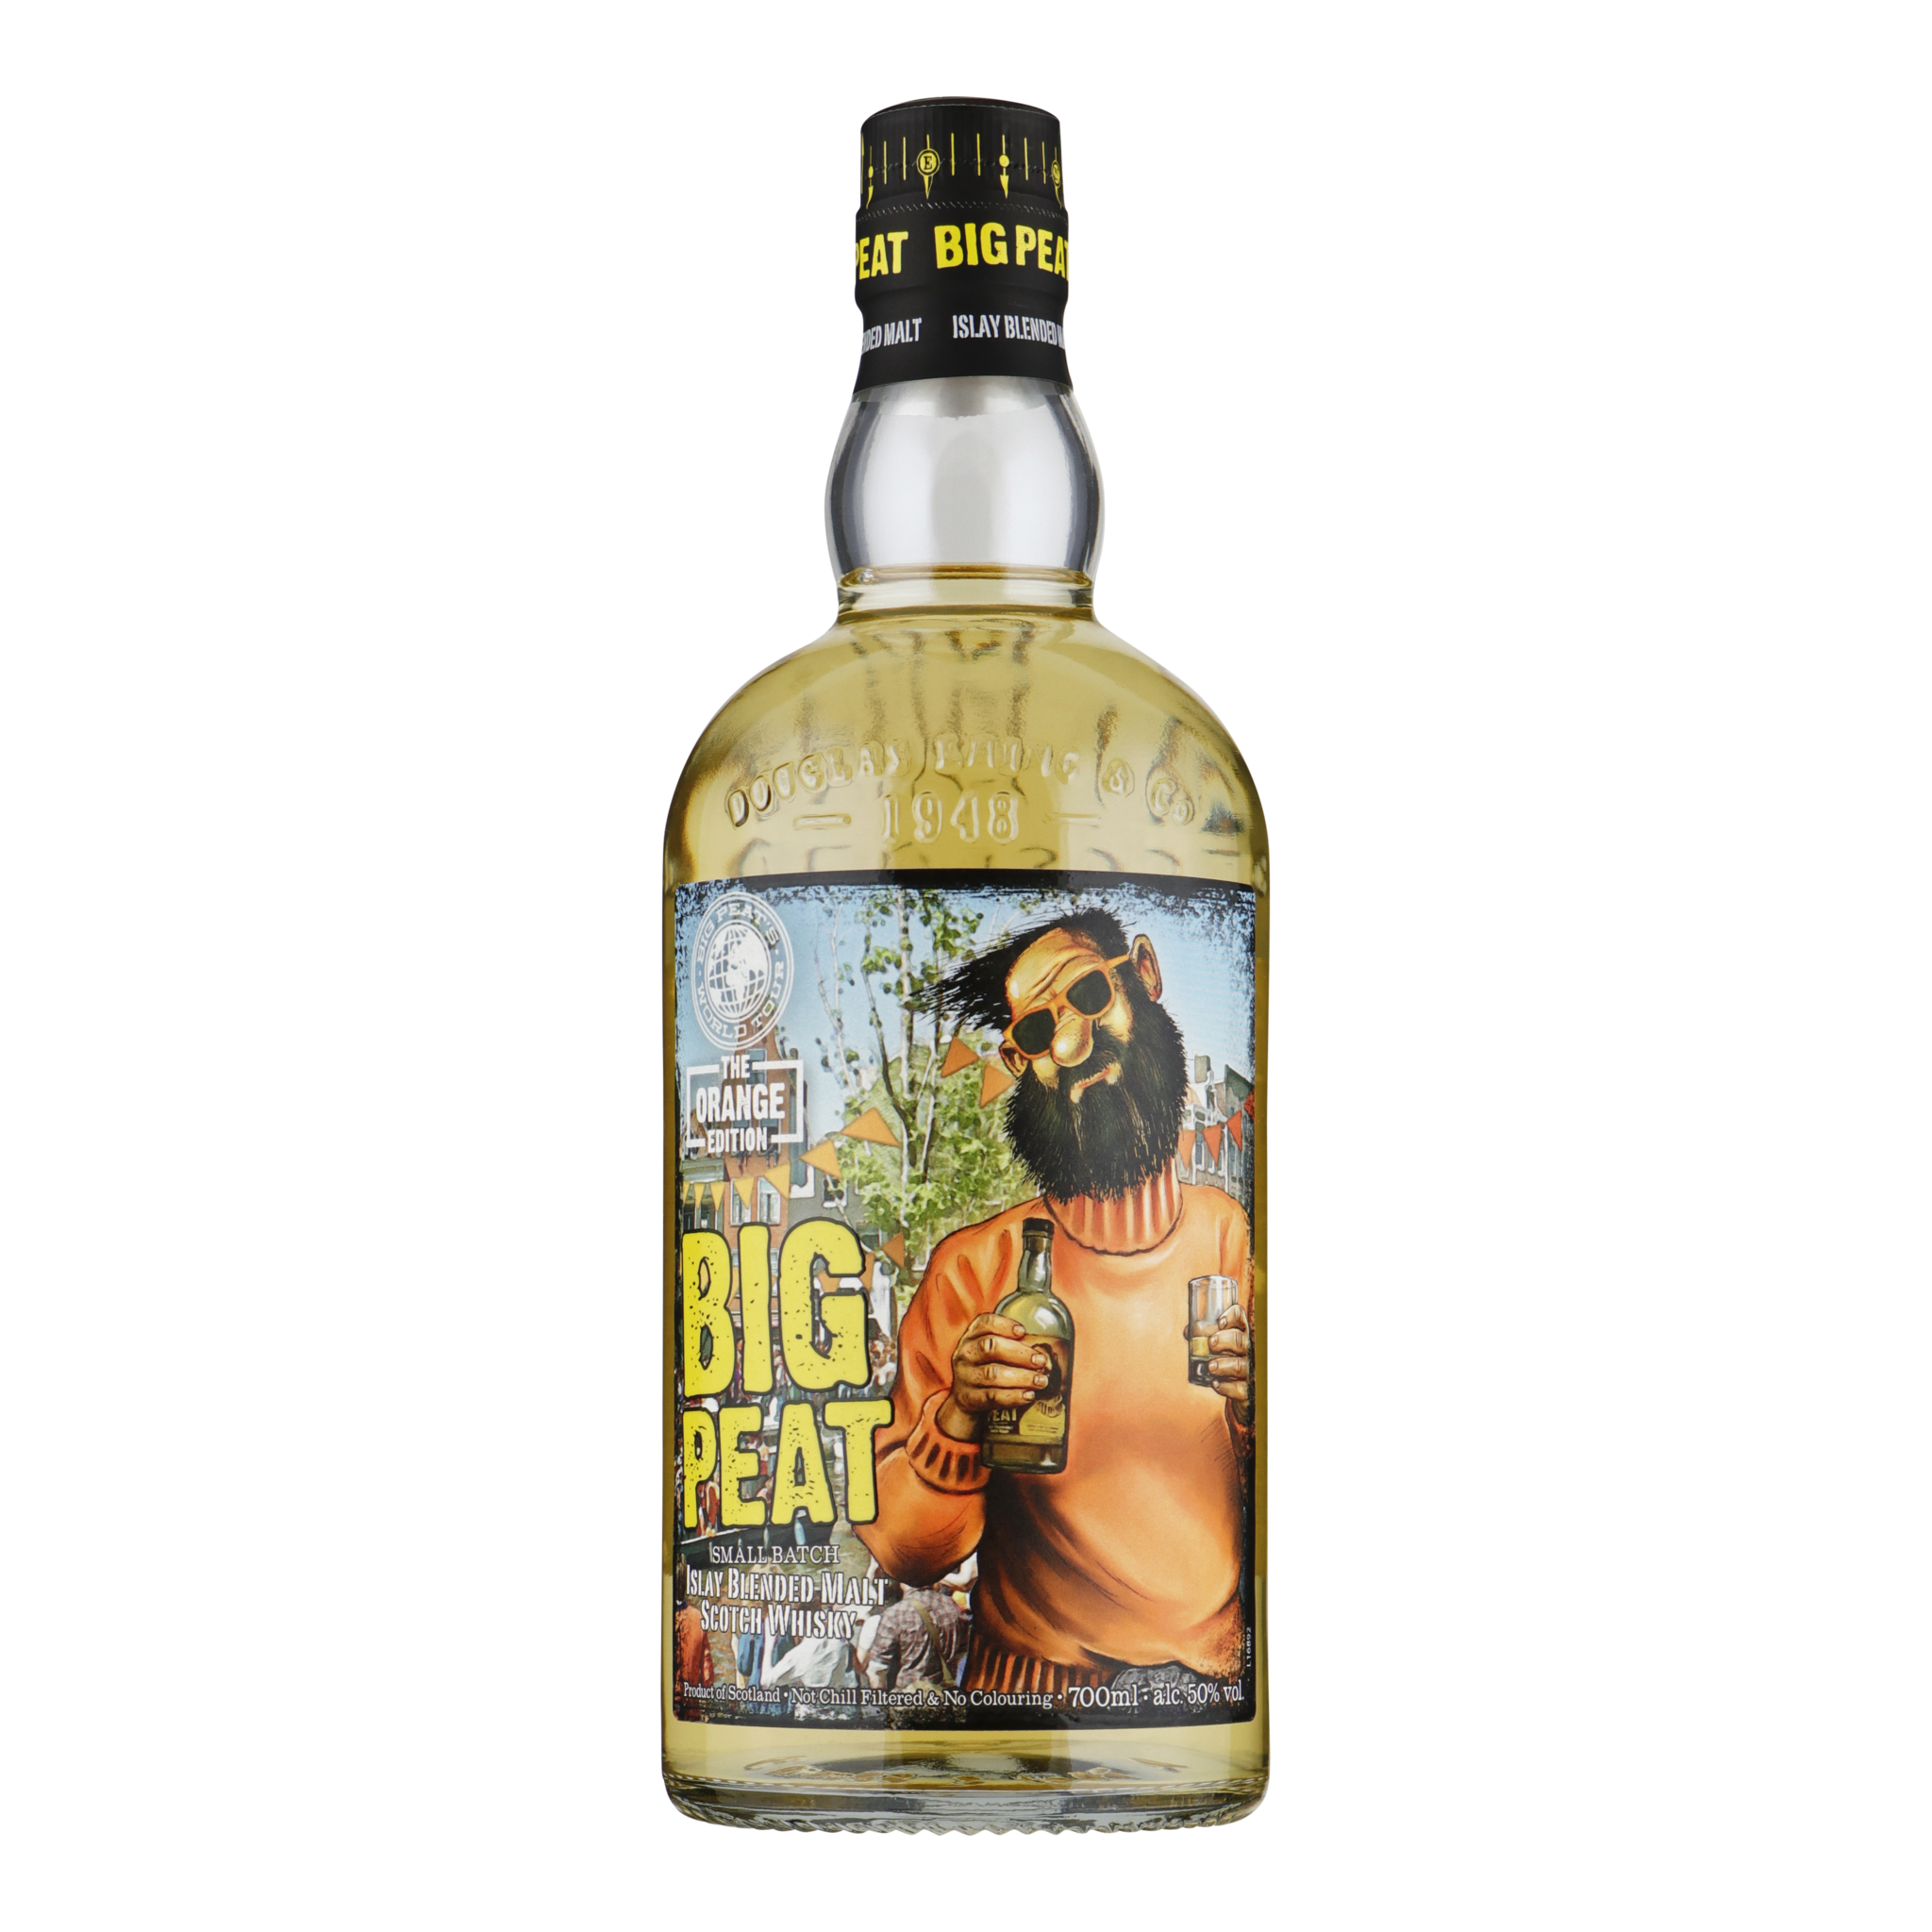 Big Peat Whisky Review - The Whiskey Jug